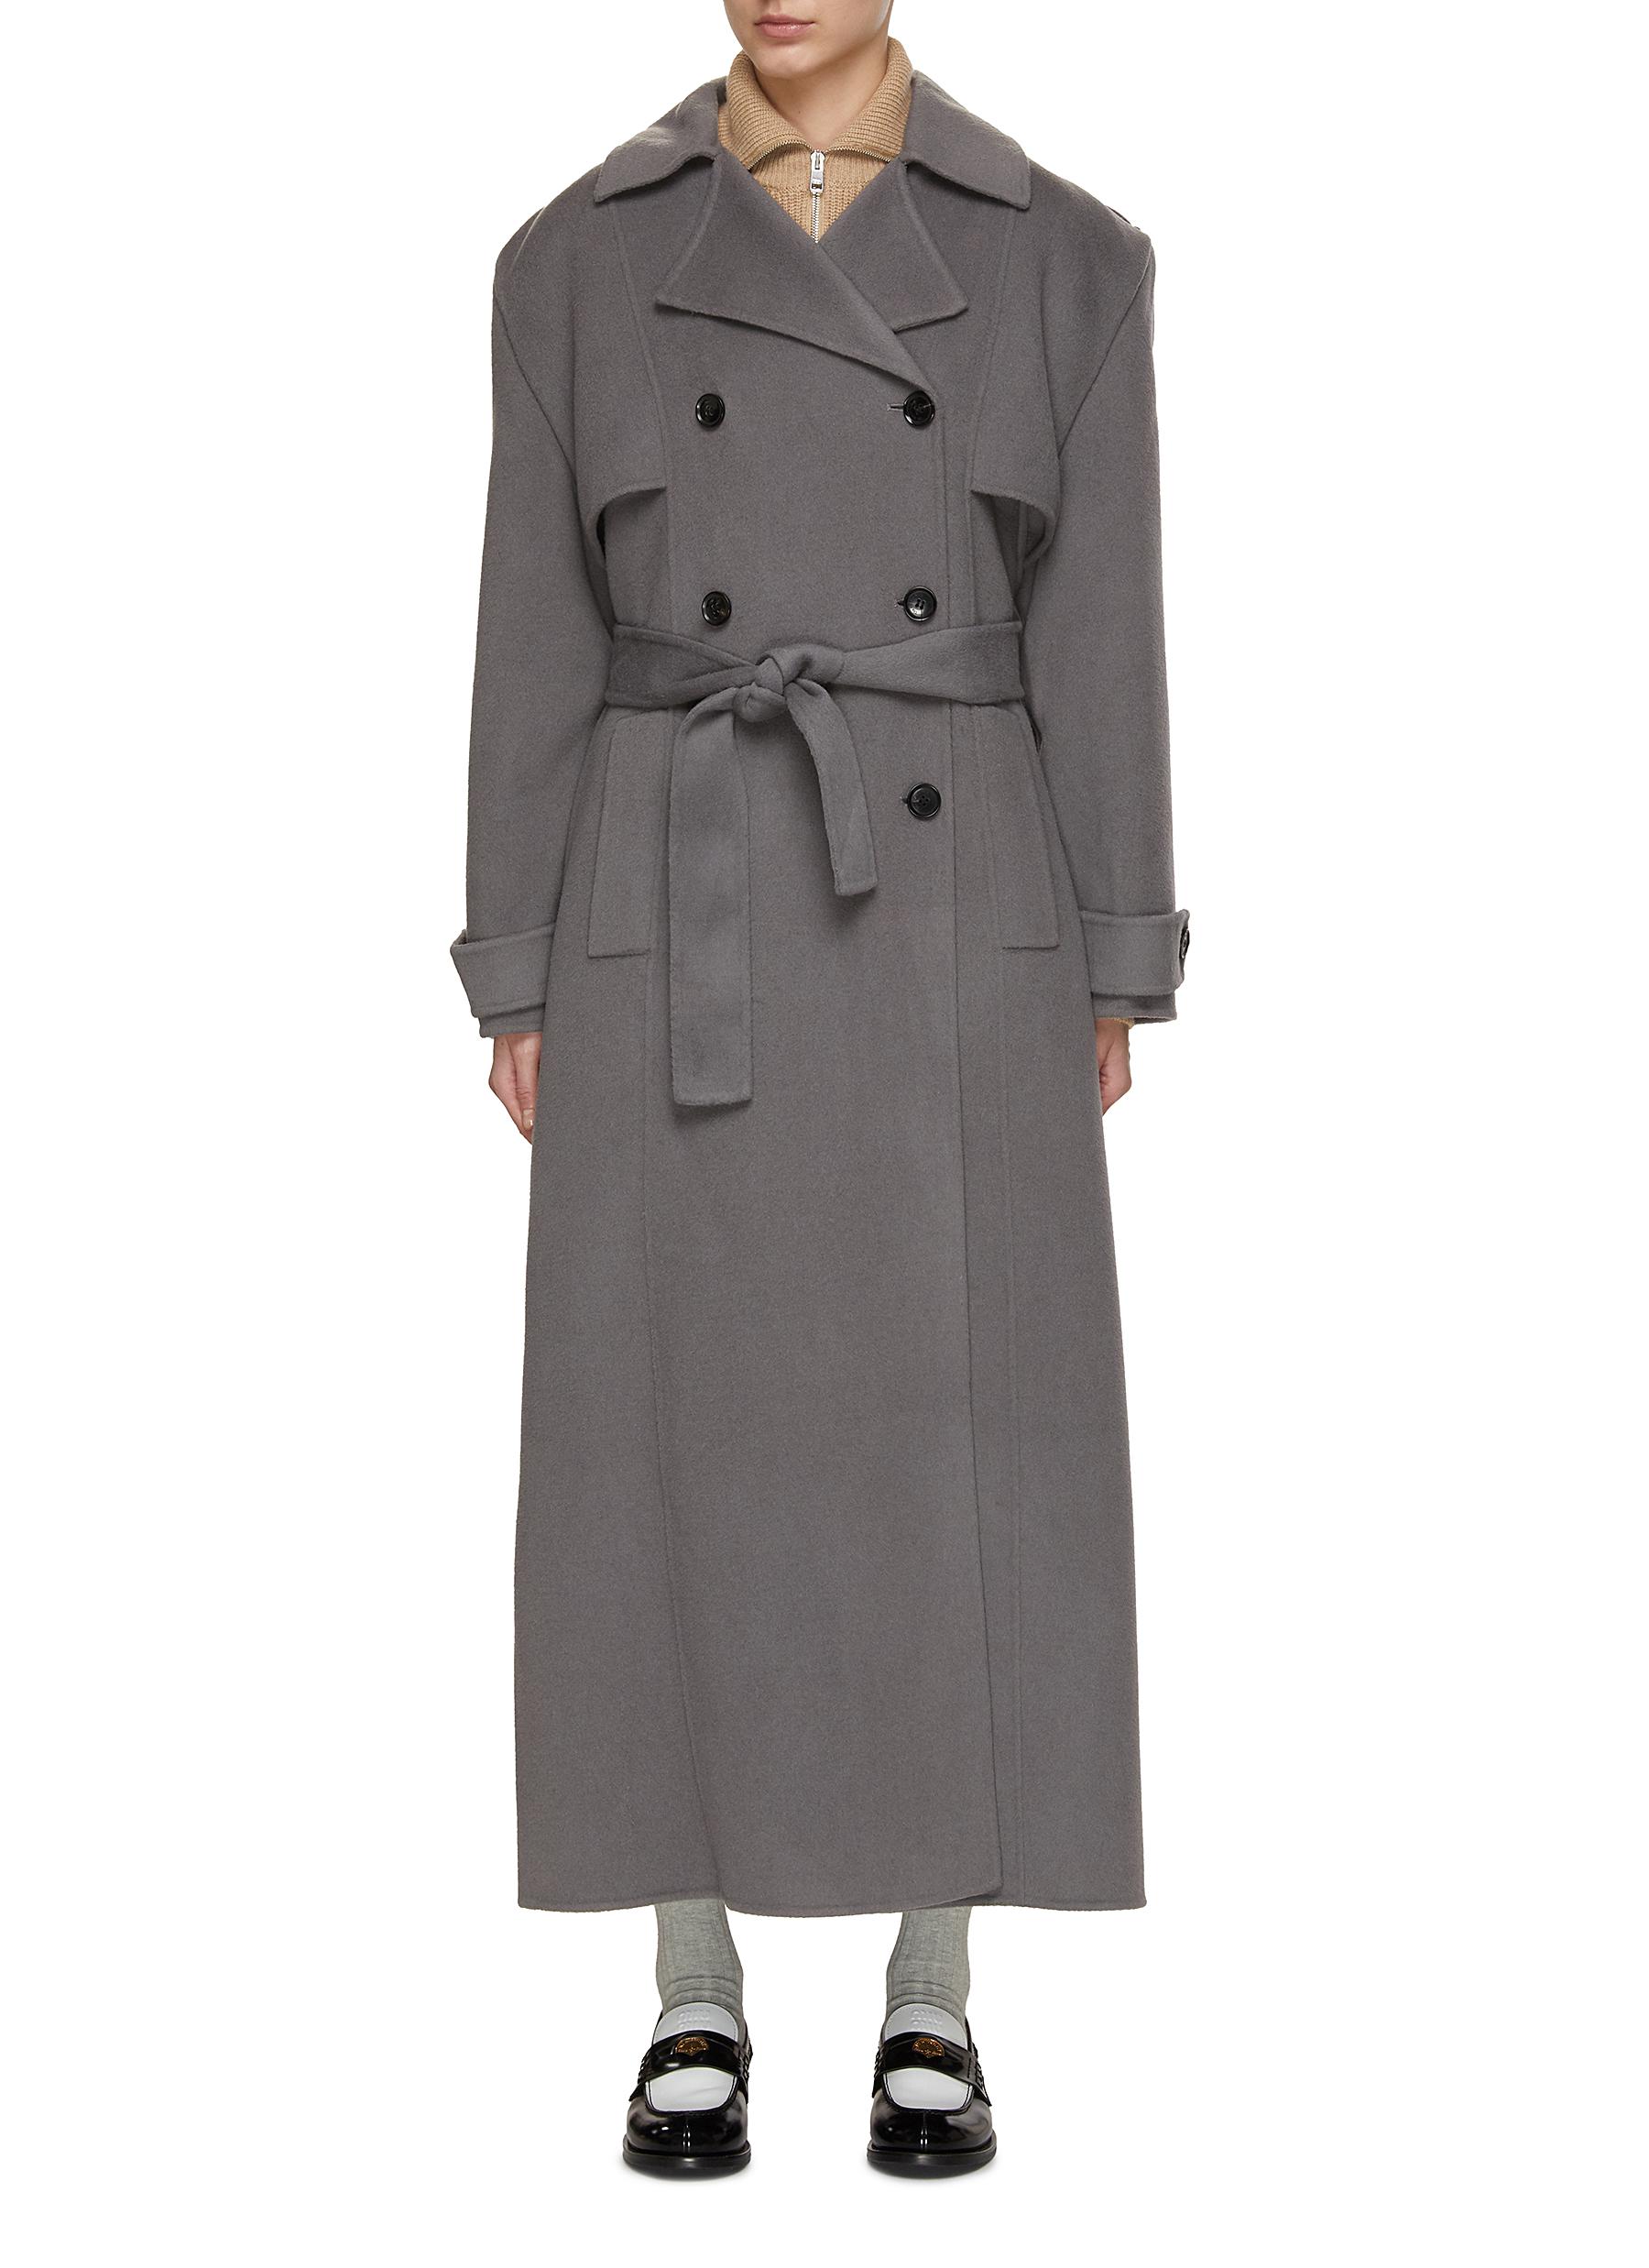 Nikola Double Breasted Wool Cashmere Trench Coat